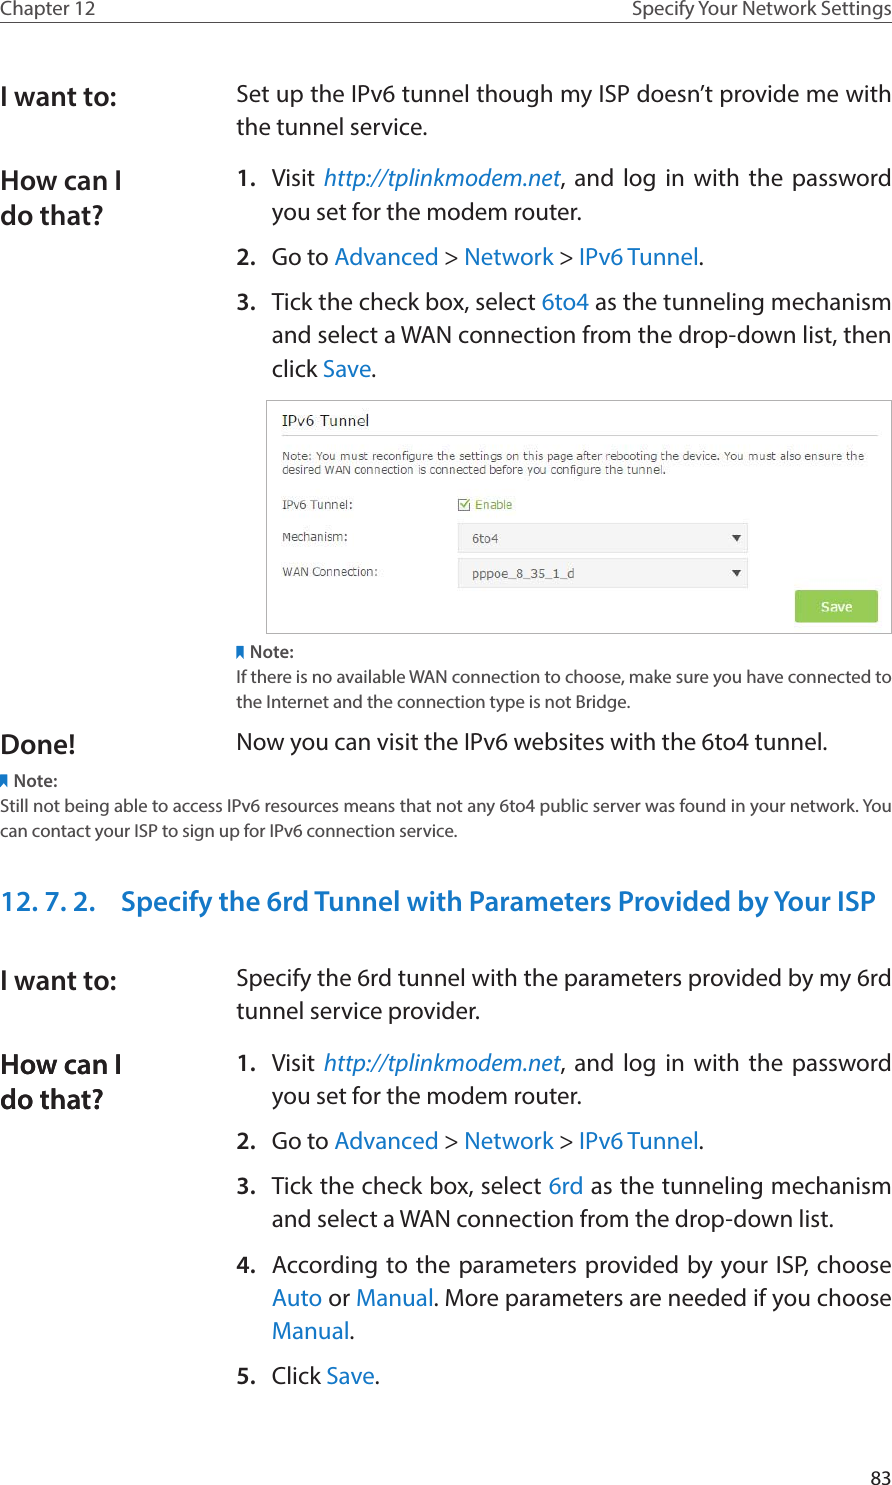 83Chapter 12 Specify Your Network SettingsSet up the IPv6 tunnel though my ISP doesn’t provide me with the tunnel service. 1.  Visit http://tplinkmodem.net, and log in with the password you set for the modem router.2.  Go to Advanced &gt; Network &gt; IPv6 Tunnel.3.  Tick the check box, select 6to4 as the tunneling mechanism and select a WAN connection from the drop-down list, then click Save.Note:If there is no available WAN connection to choose, make sure you have connected to the Internet and the connection type is not Bridge.Now you can visit the IPv6 websites with the 6to4 tunnel.Note:Still not being able to access IPv6 resources means that not any 6to4 public server was found in your network. You can contact your ISP to sign up for IPv6 connection service.12. 7. 2.  Specify the 6rd Tunnel with Parameters Provided by Your ISPSpecify the 6rd tunnel with the parameters provided by my 6rd tunnel service provider.1.  Visit http://tplinkmodem.net, and log in with the password you set for the modem router.2.  Go to Advanced &gt; Network &gt; IPv6 Tunnel.3.  Tick the check box, select 6rd as the tunneling mechanism and select a WAN connection from the drop-down list.4.  According to the parameters provided by your ISP, choose Auto or Manual. More parameters are needed if you choose Manual.5.  Click Save.I want to:How can I do that?Done!I want to:How can I do that?How can I do that?